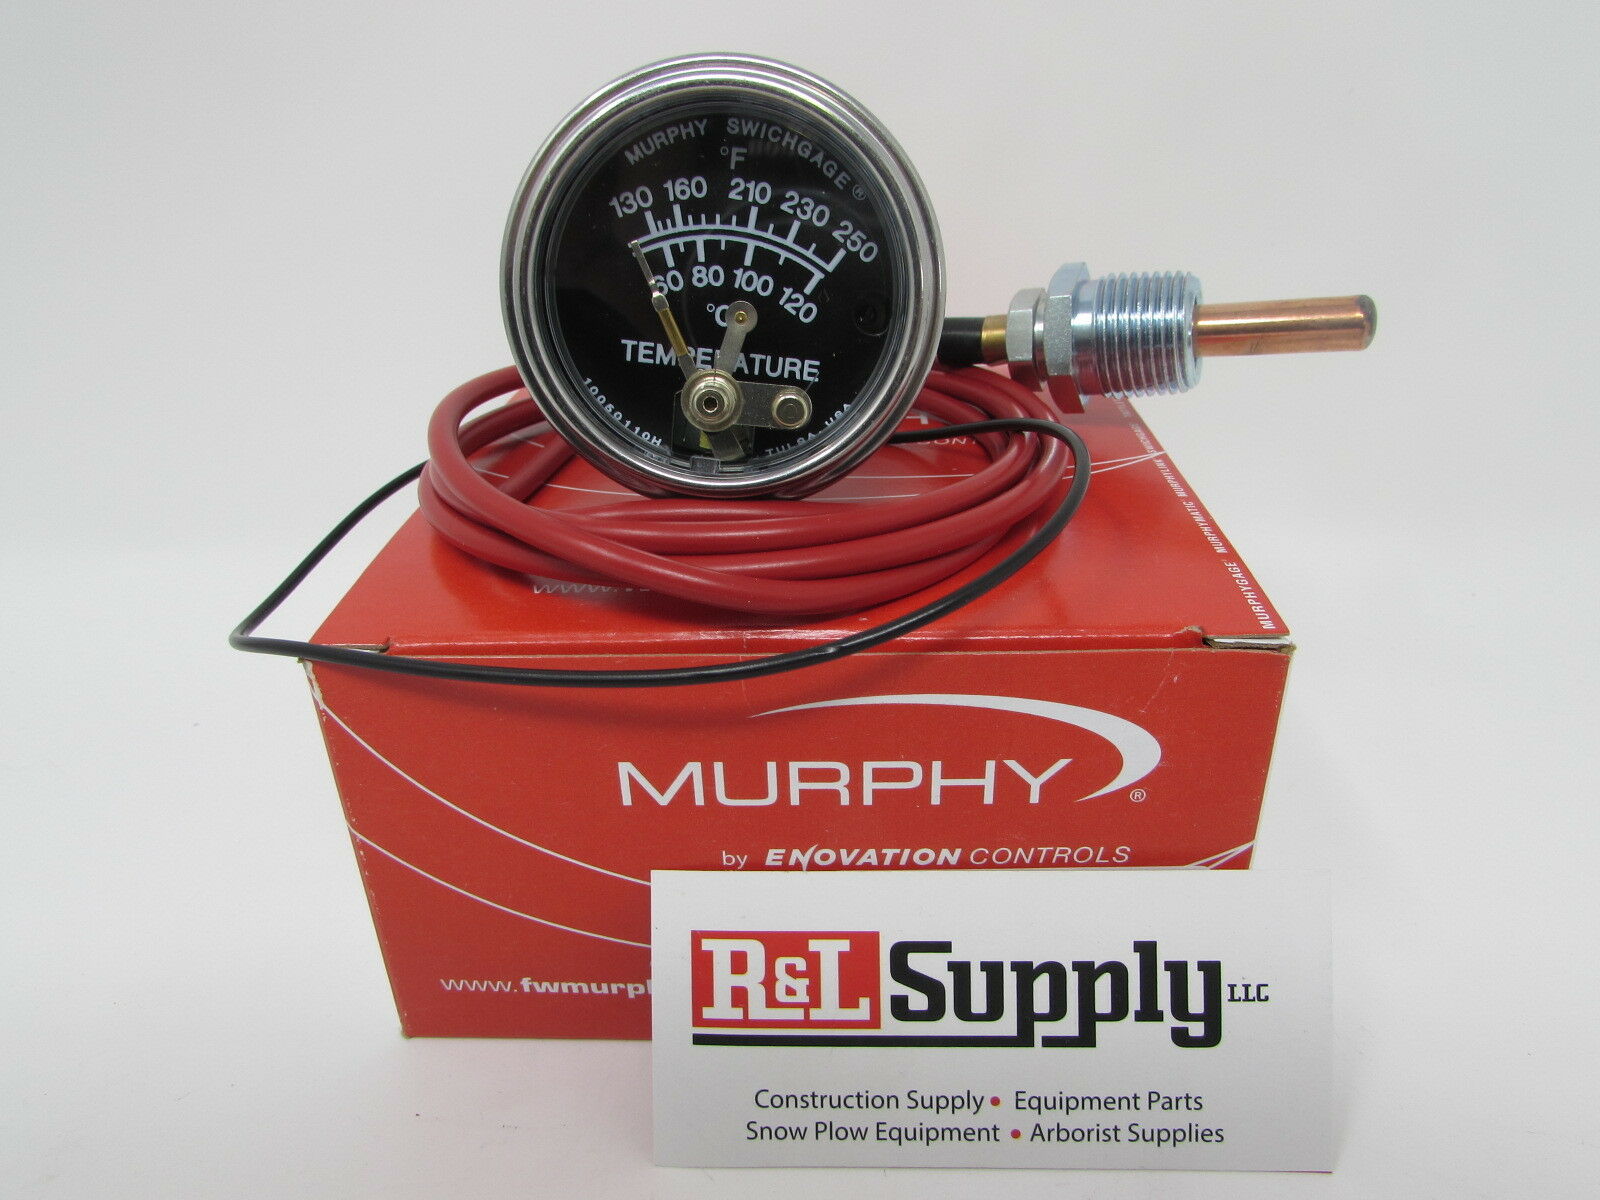 4ft Murphy 20t-250-4-1/2 250 Degree Temperature Gauge For Equipment & Chippers